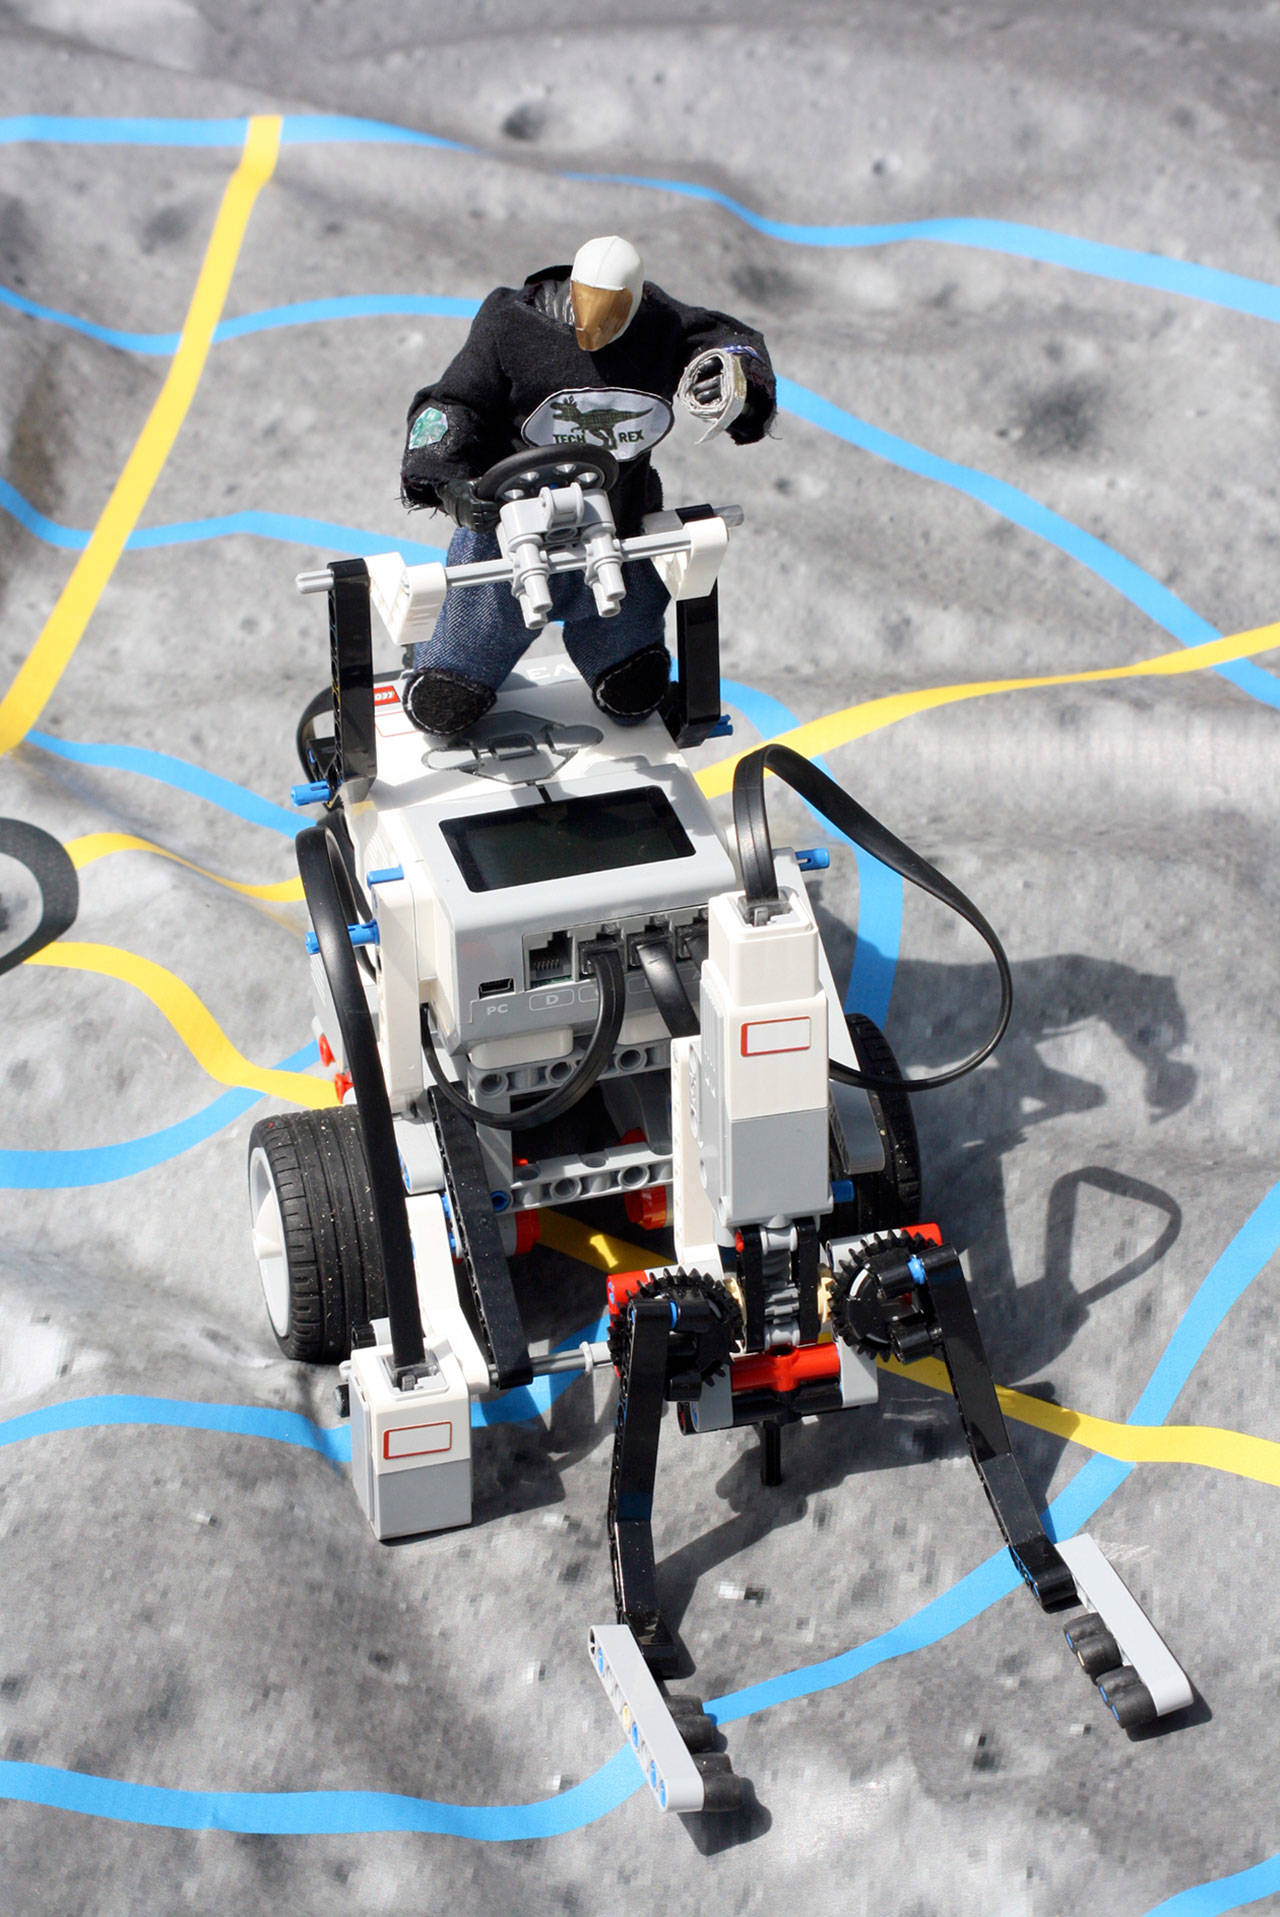 The Team TechRex astronaut sits atop the Lego Mindstorm rover with a symbolic roll of duct tape attached to its hand. (Melanie Greer)